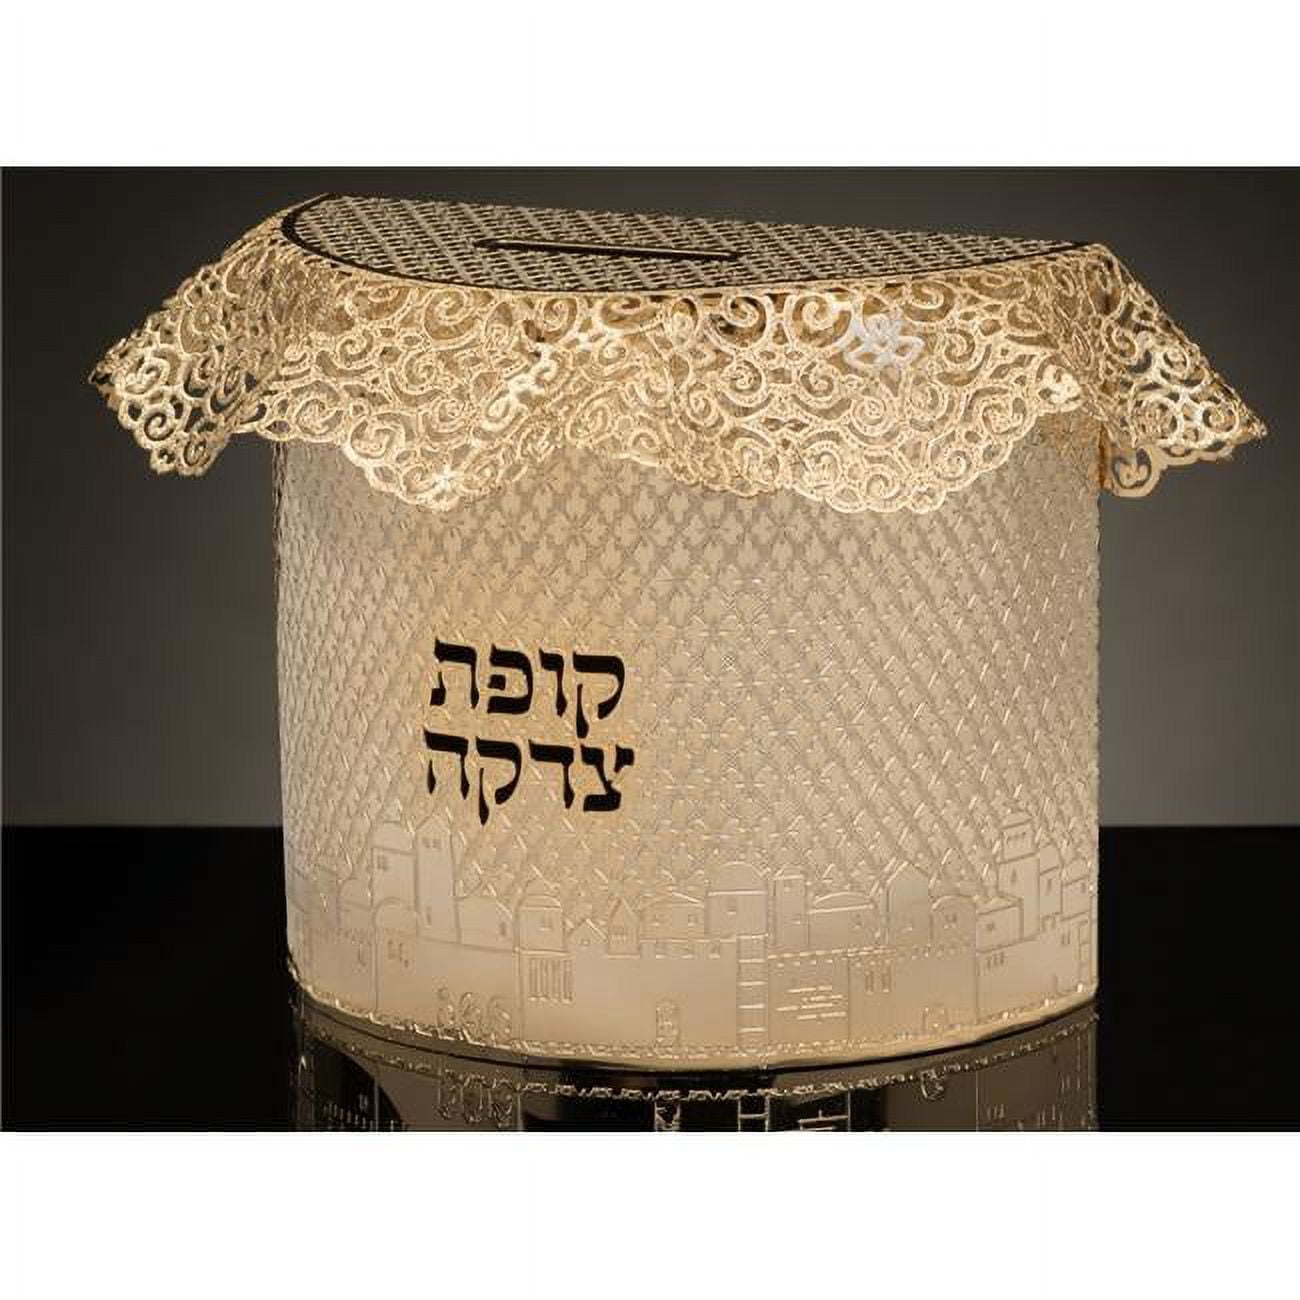 Picture of AM Judaica 49794 4 x 4 x 2 in., 0.12 x 1.62 in. 24K Gold Plated by Jerusalem Impressions Tzedakah Box